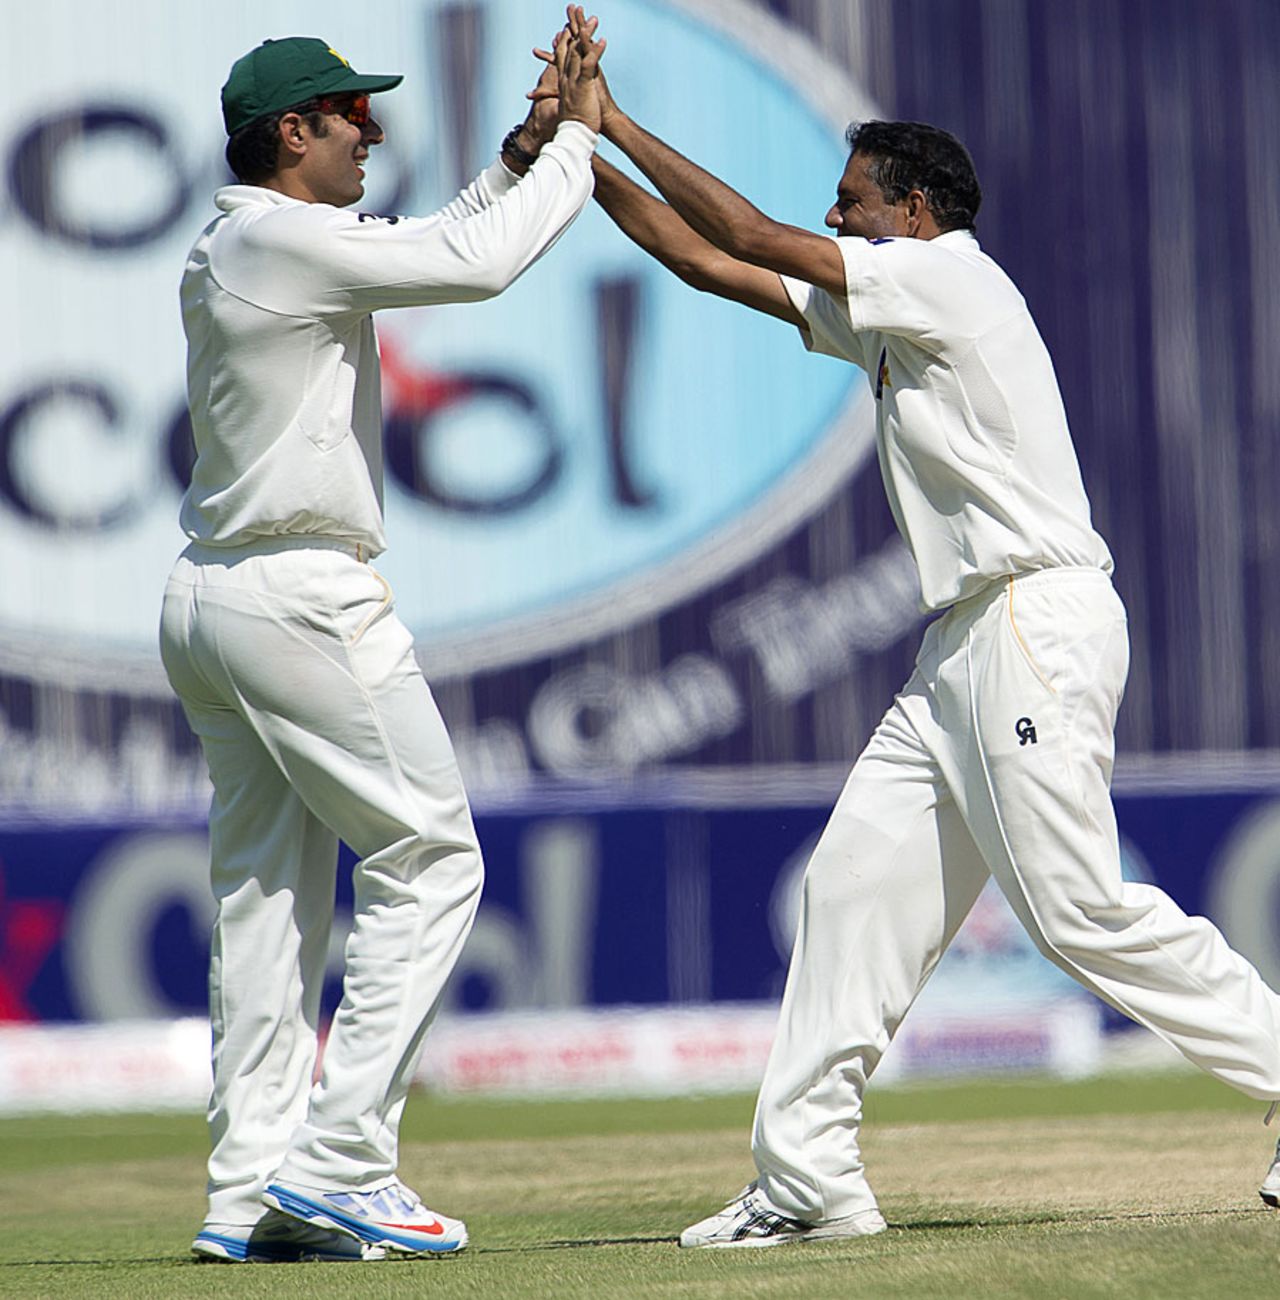 Zulfiqar Babar and Misbah-ul-Haq celebrate a wicket, Pakistan v South Africa, 1st Test, 4th day, Abu Dhabi, October 17, 2013